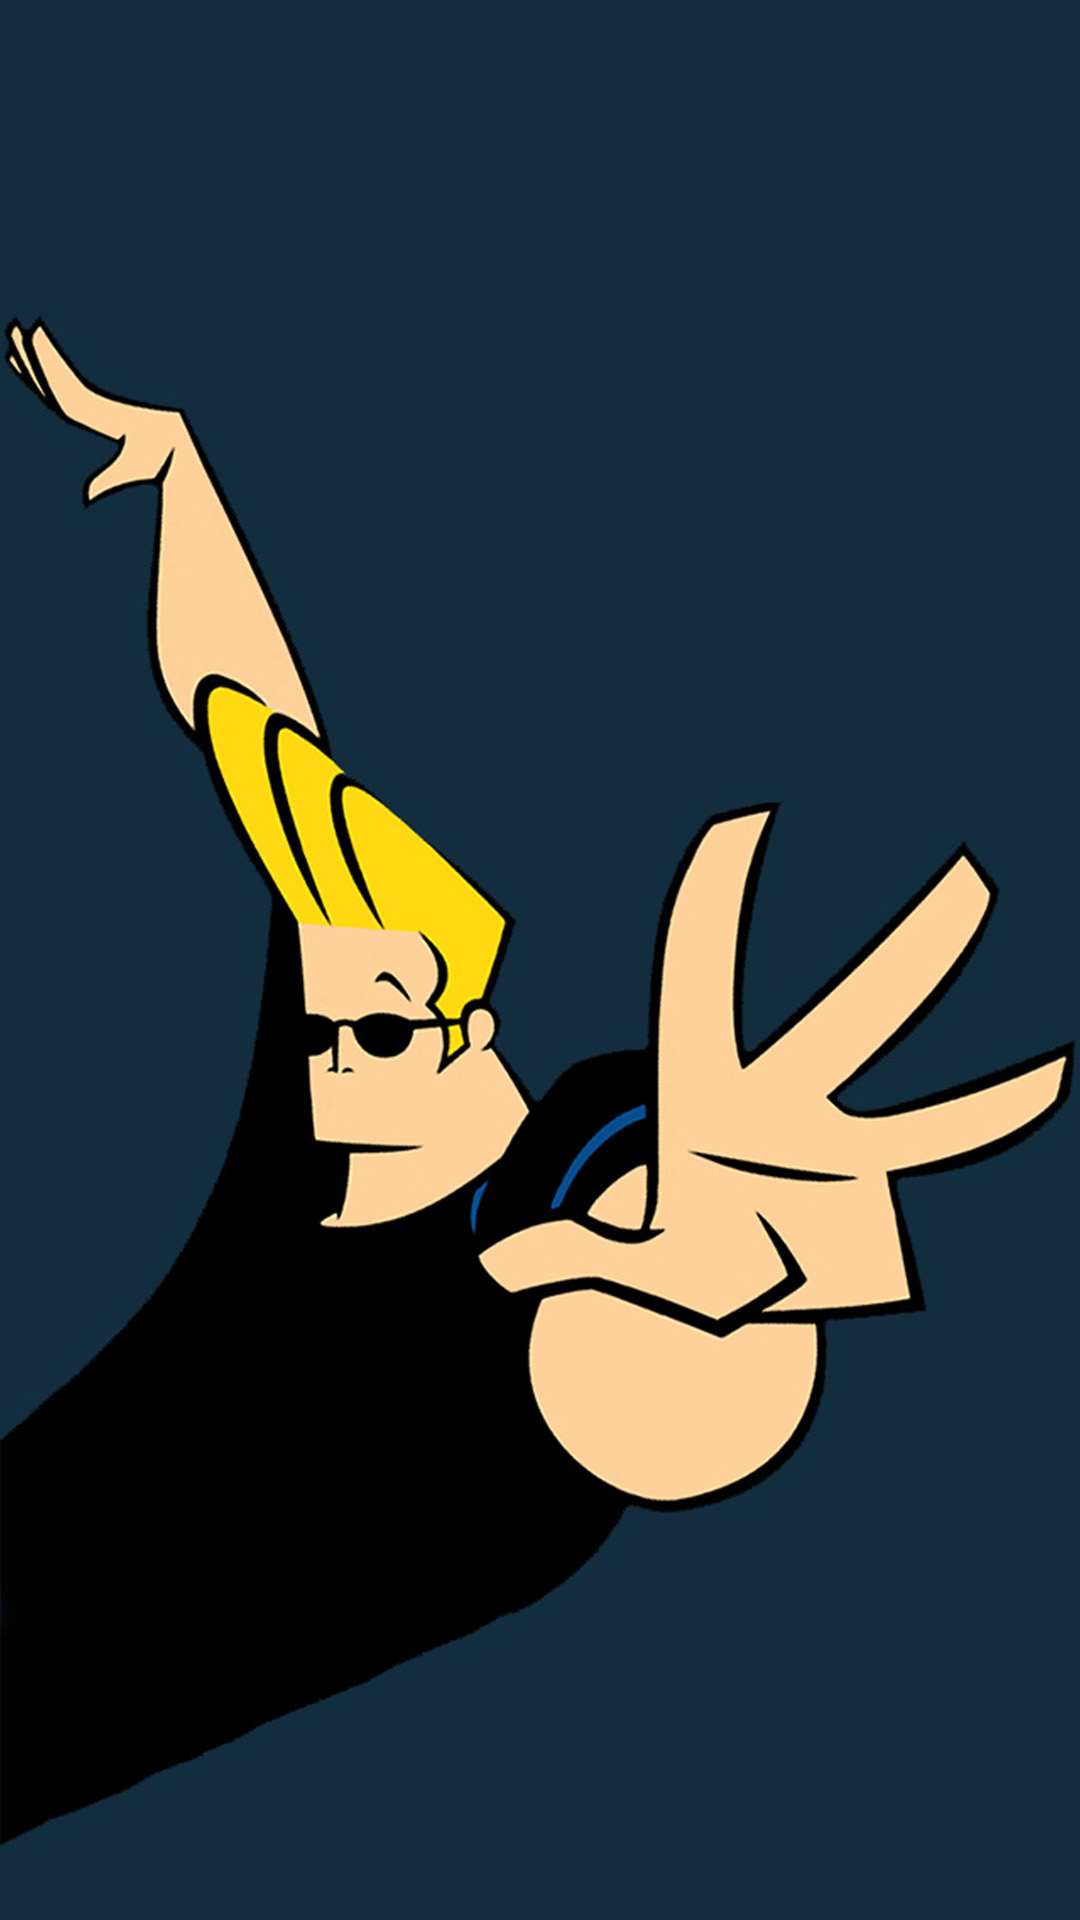 Johnny Bravo Wallpapers for Galaxy S5